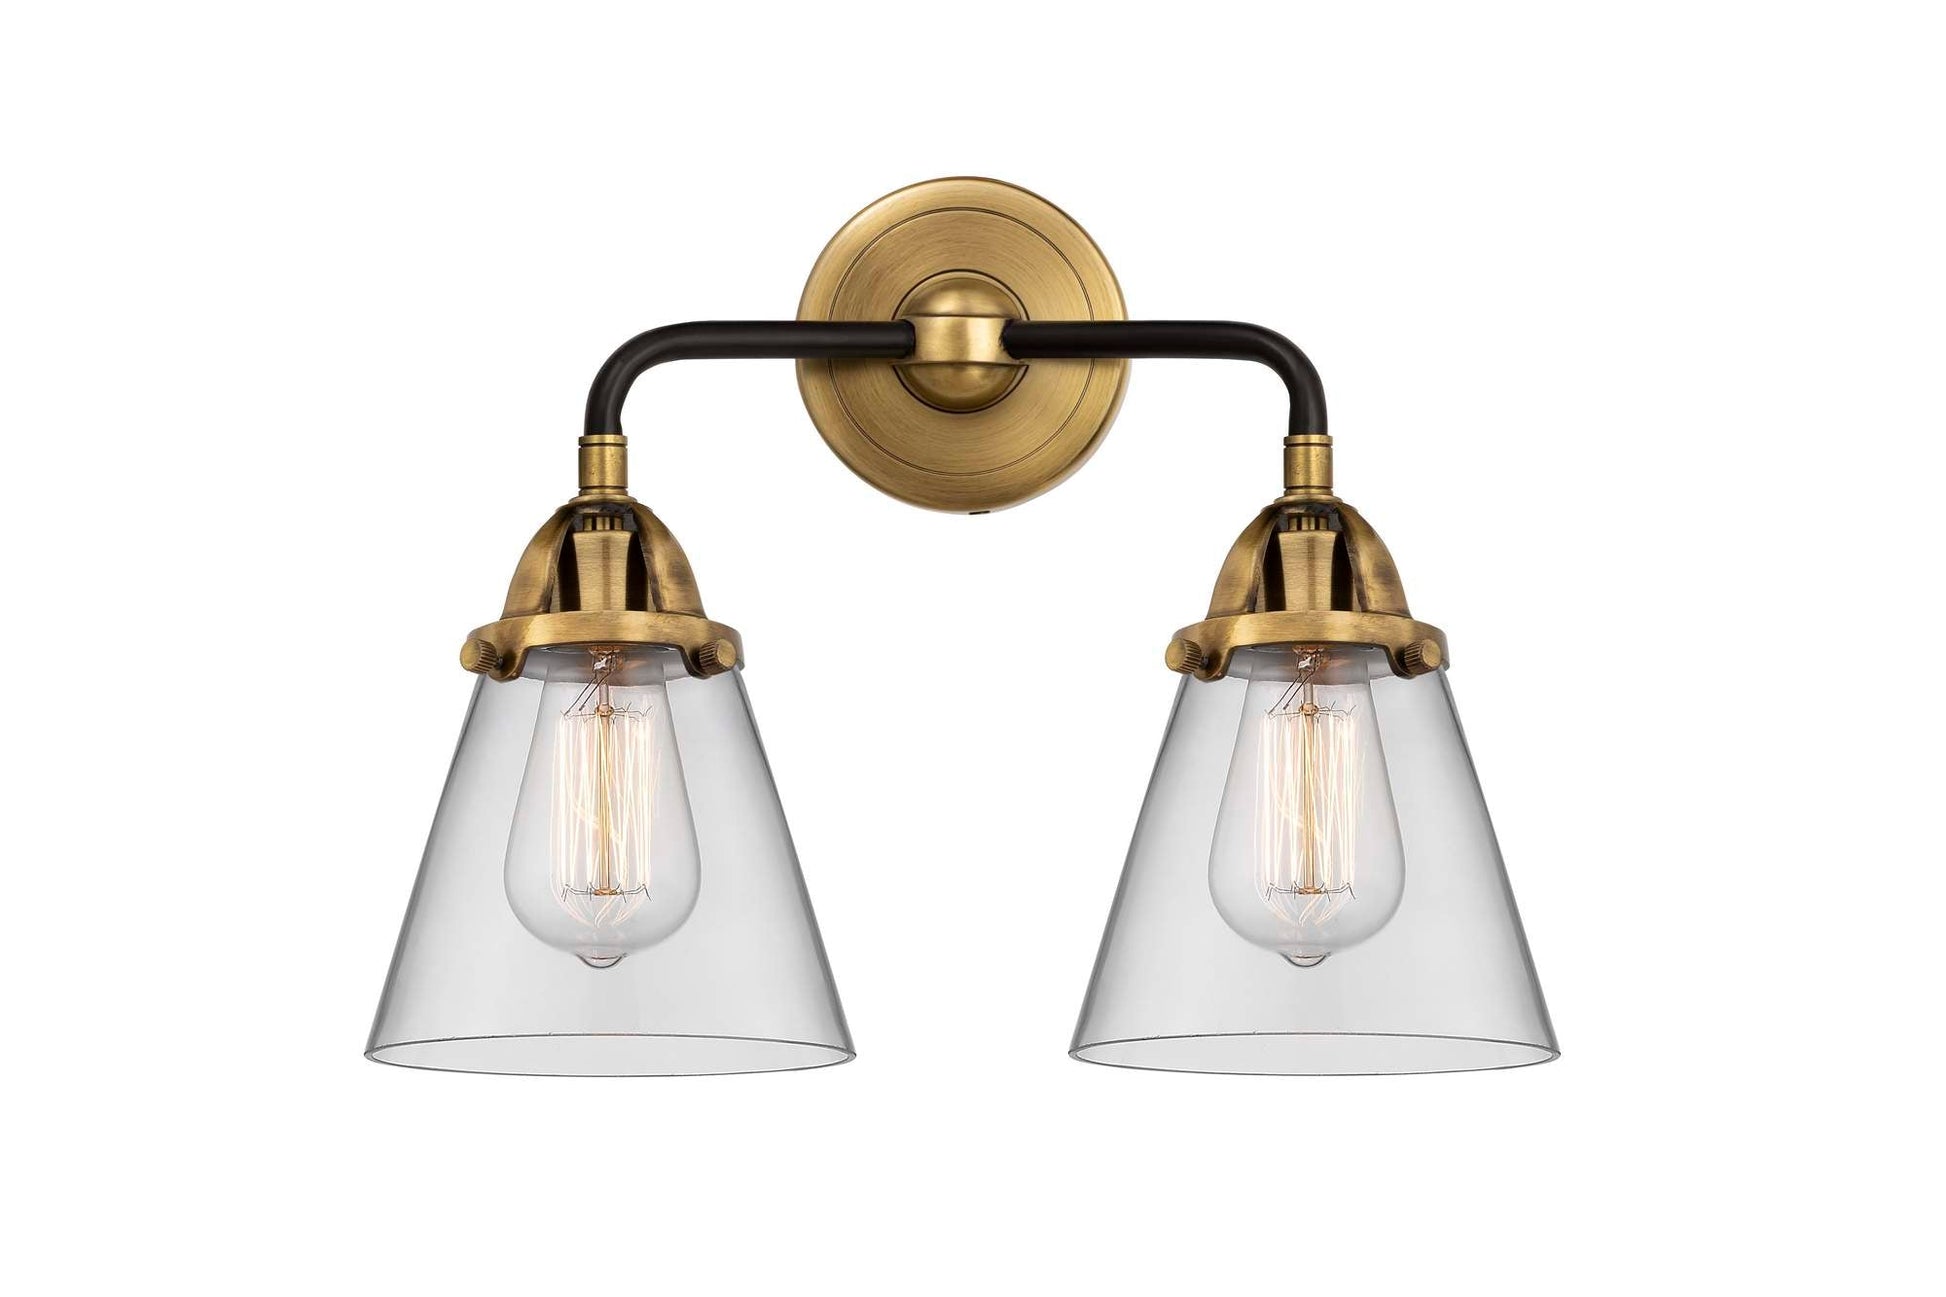 288-2W-BAB-G62 2-Light 14.25" Black Antique Brass Bath Vanity Light - Clear Small Cone Glass - LED Bulb - Dimmensions: 14.25 x 7.375 x 12.125 - Glass Up or Down: Yes